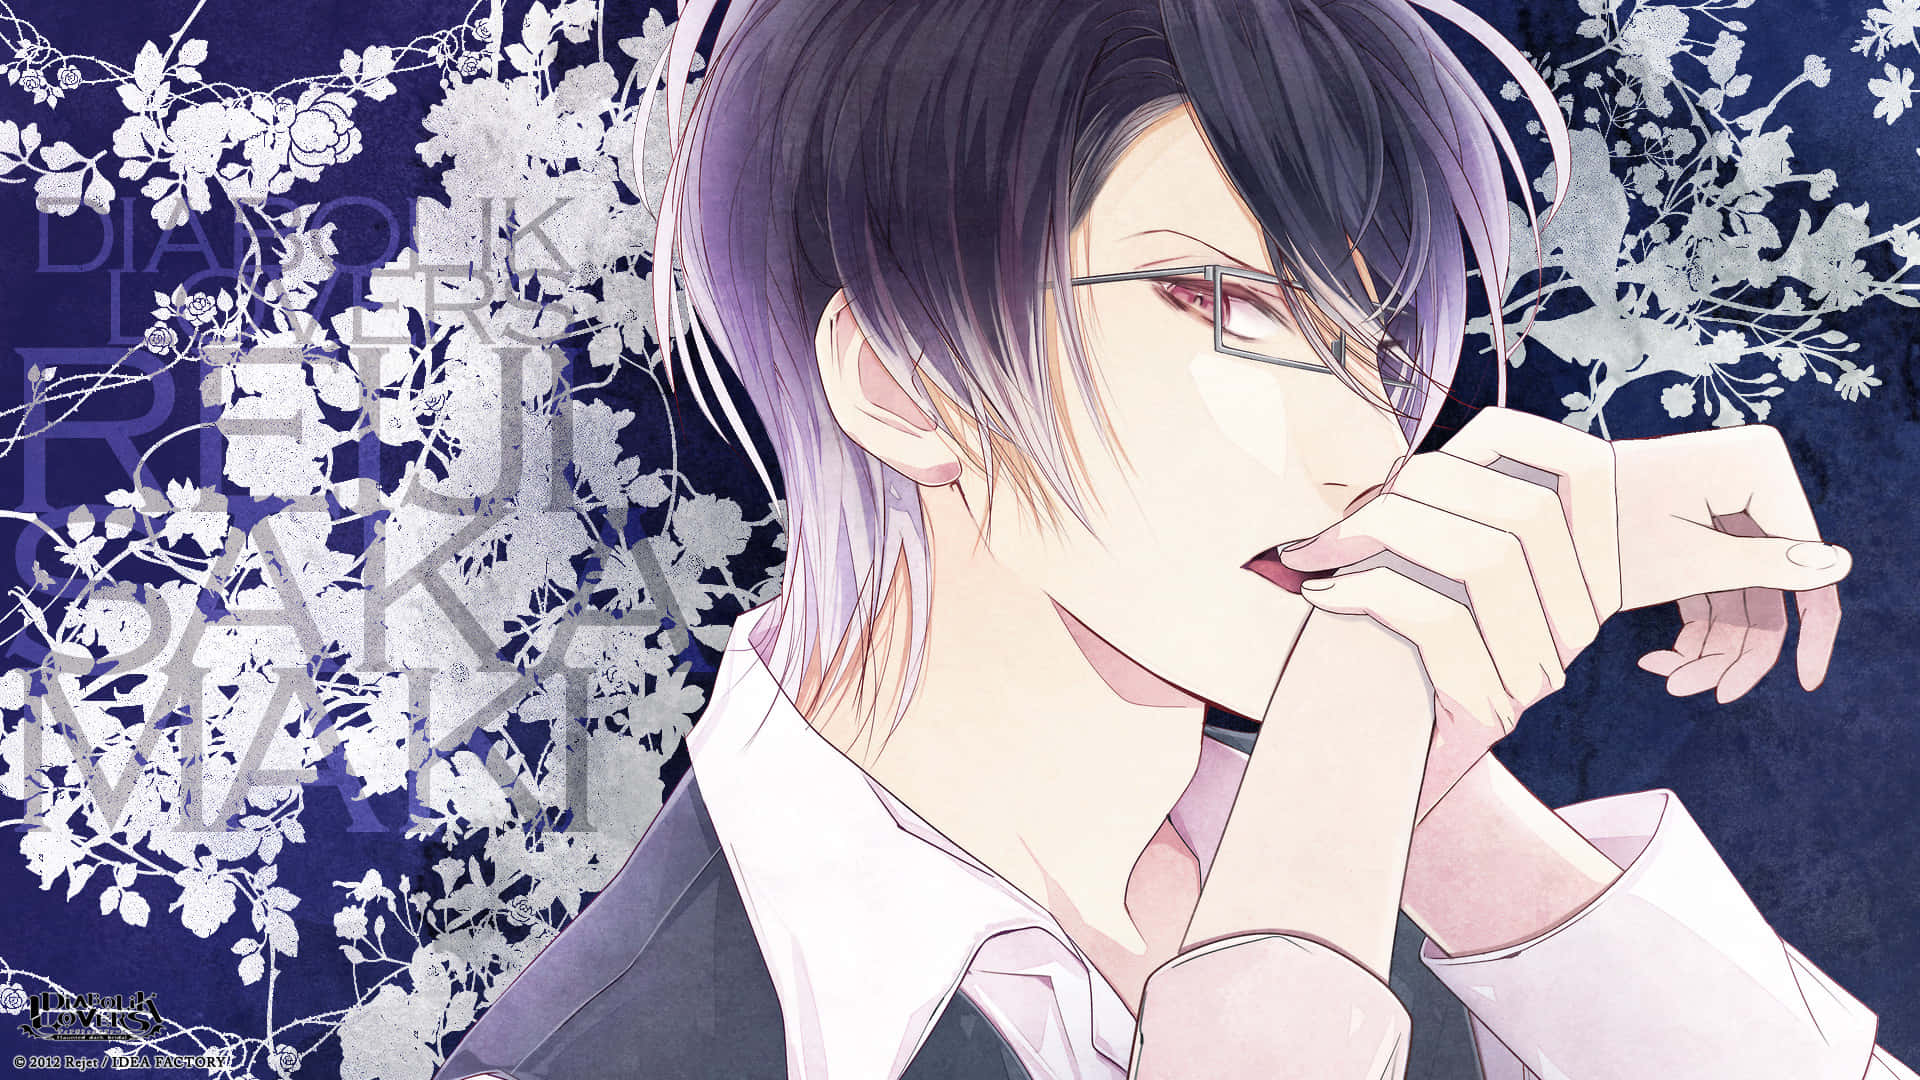 Take a journey into the supernatural world of the Diabolik Lovers